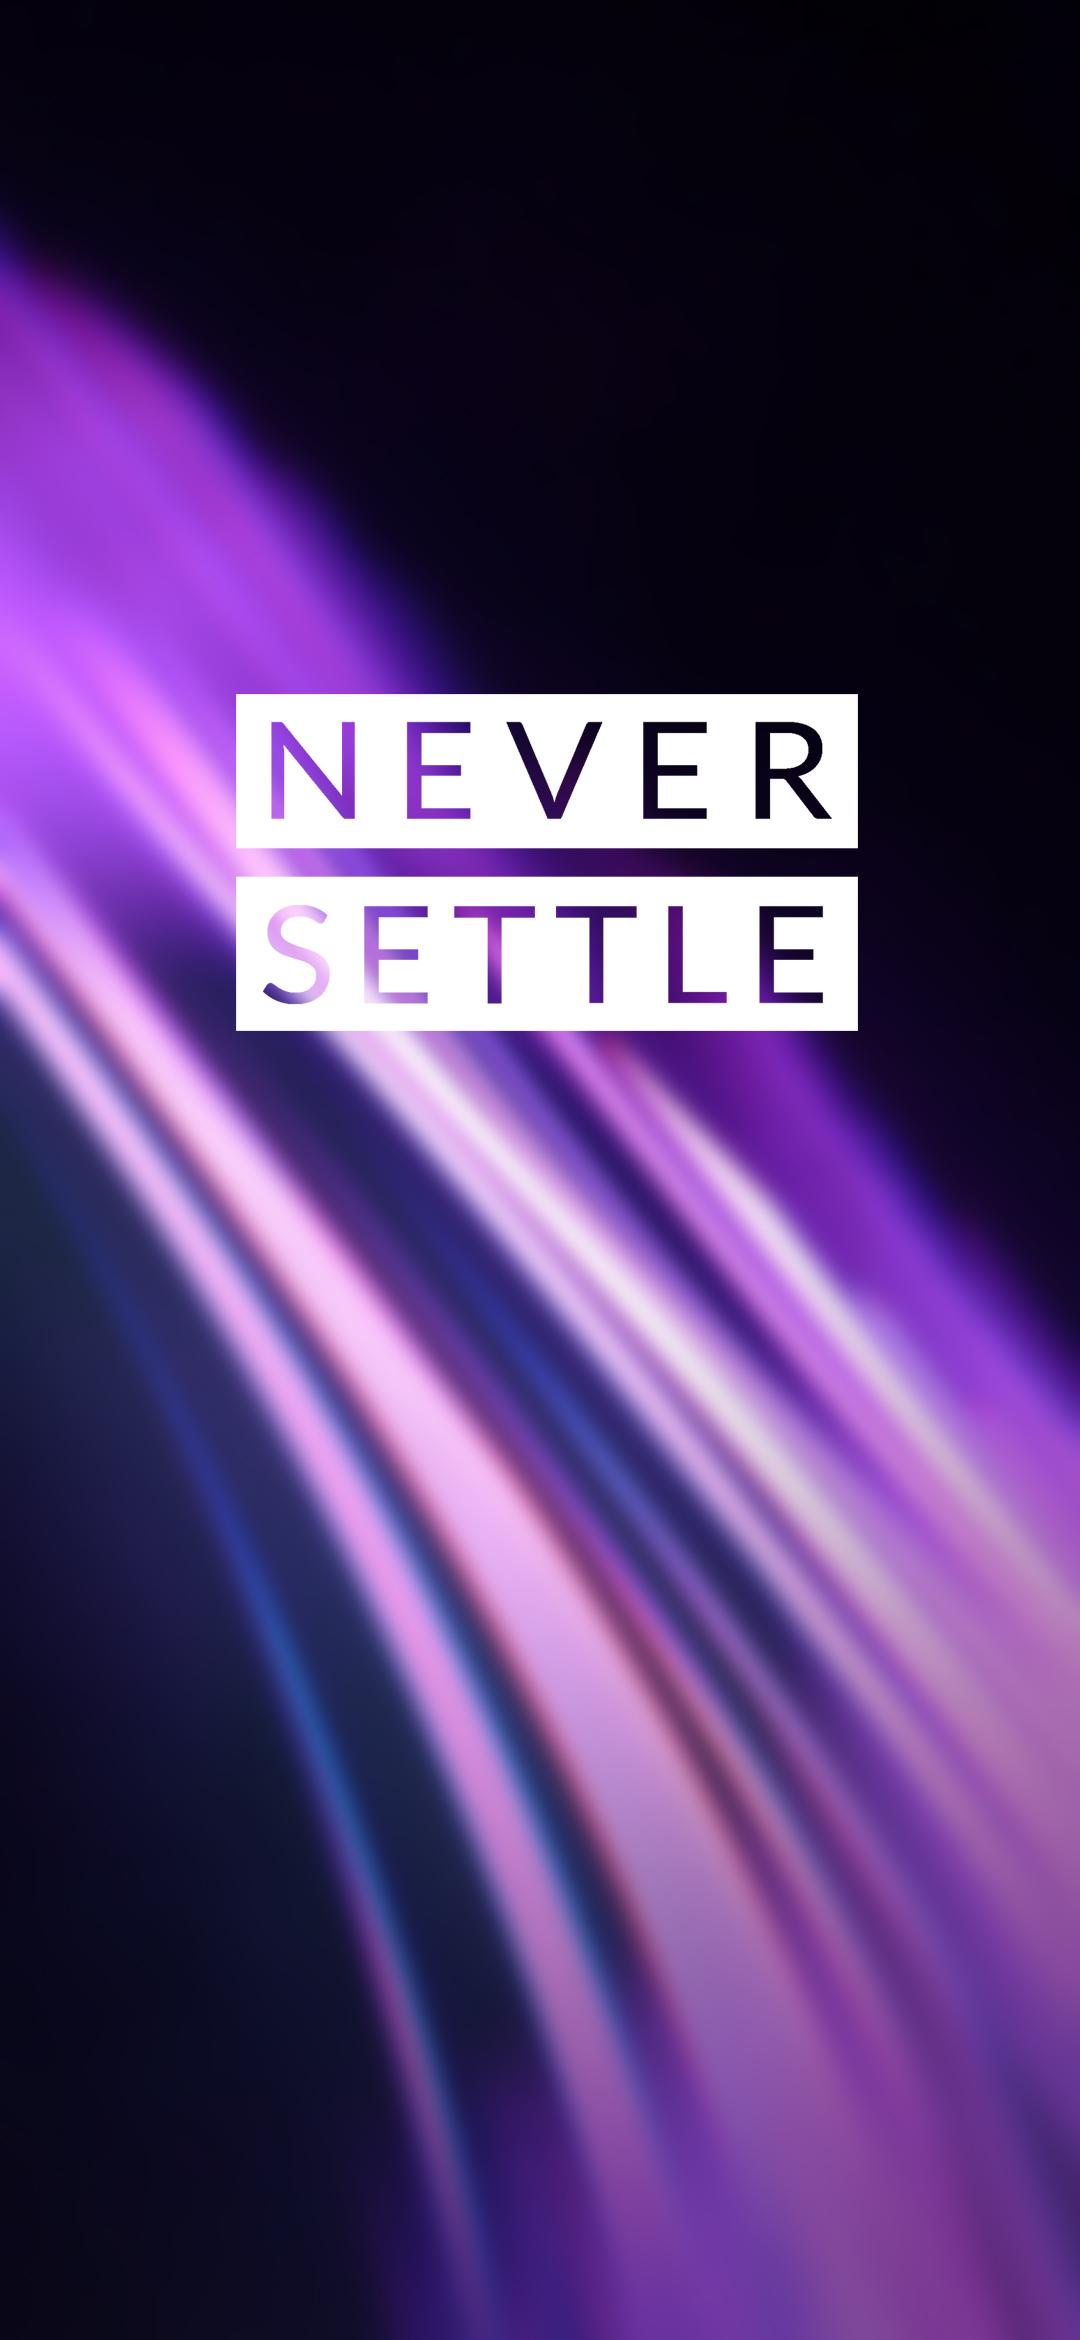 100+] Never Settle Wallpapers | Wallpapers.com